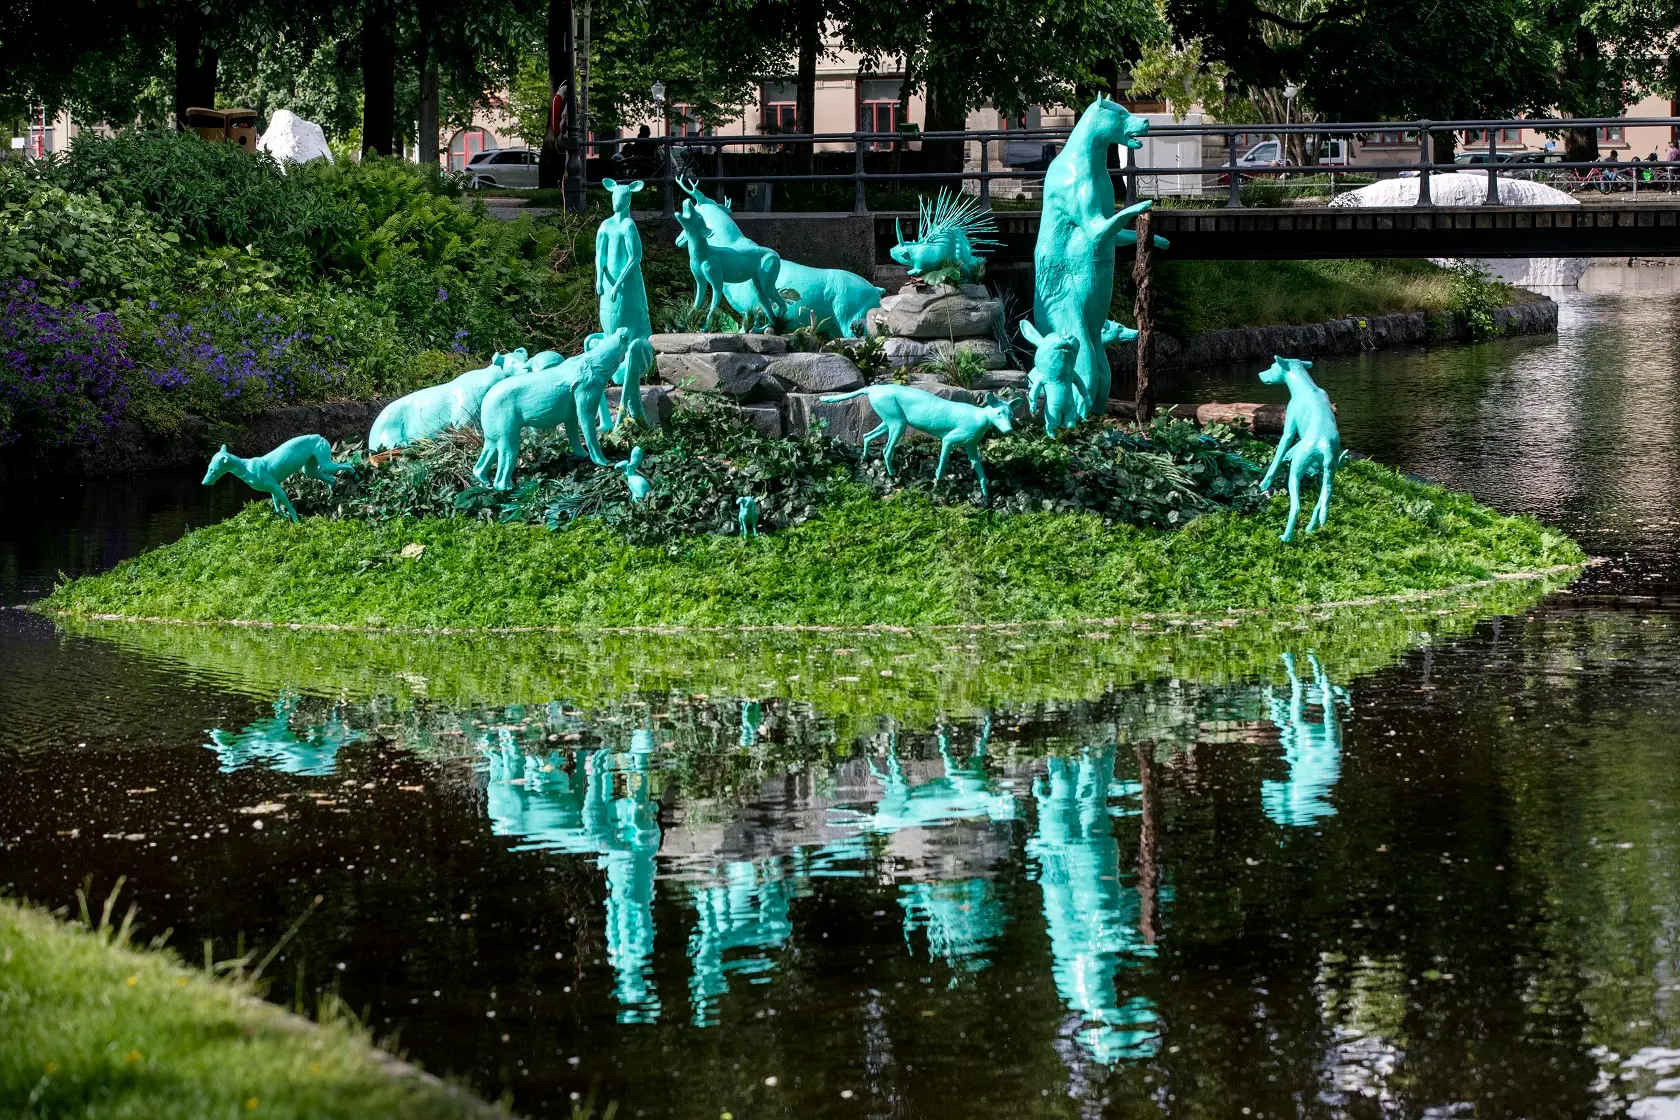 In the center of Örebro, a green island floats on the water surface of Svartån. The island has been occupied by 15 different wild animals depicted in green-blue lifelike statues. The island and the animals are reflected on the surface of the water.